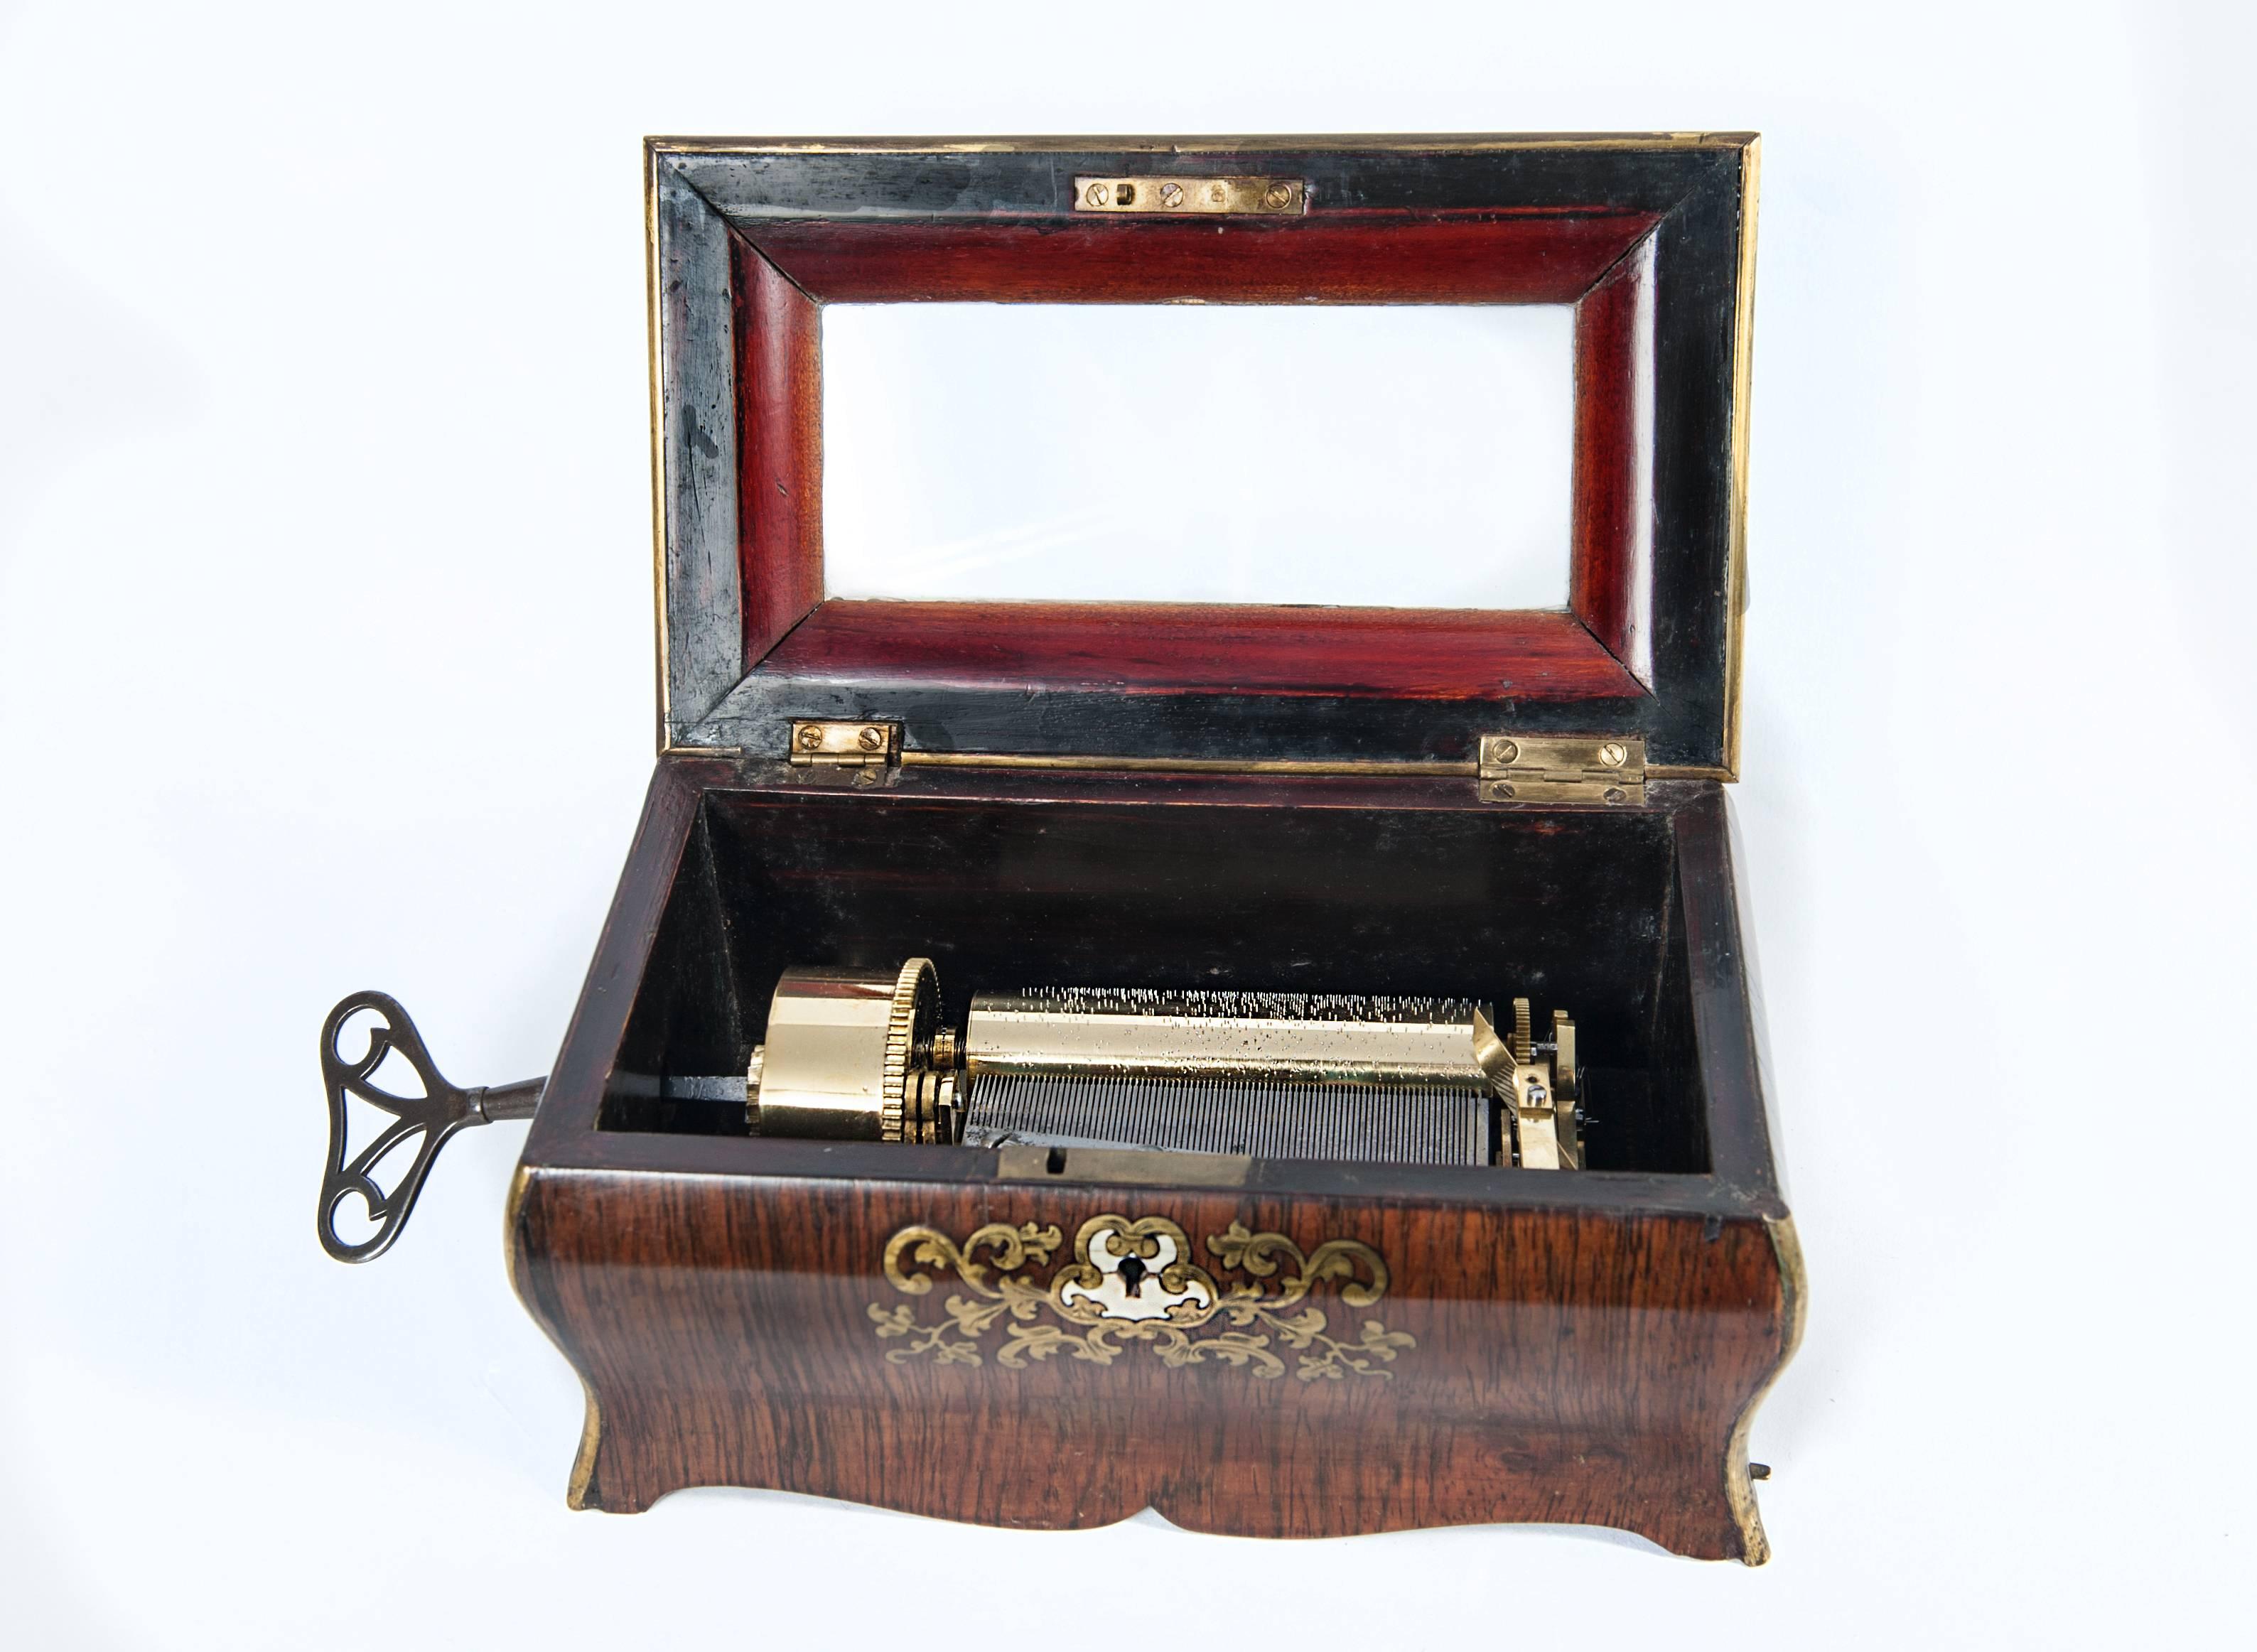 Functional Mid-19th Century Music Box  In Good Condition For Sale In Amsterdam, Noord Holland